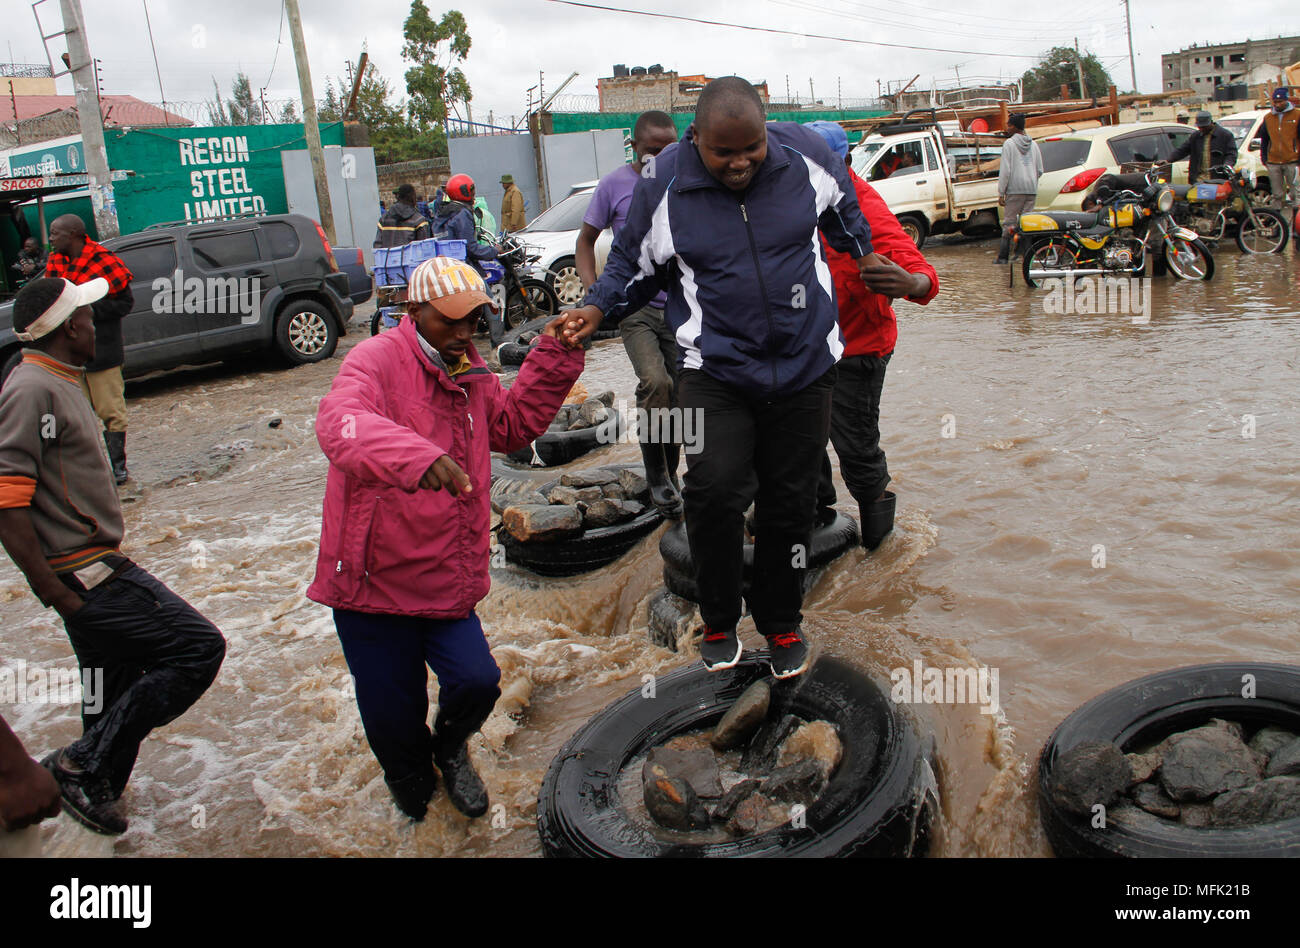 (180426) -- NAIROBI, April, 26, 2018 (Xinhua) -- People use tyres to cross a flooded road in Nairobi, capital of Kenya, April 24, 2018. The Kenya Red Cross Society said on Wednesday that it is providing emergency relief to more than 210,000 people impacted by rising flood waters that continue to wreak havoc in many parts of Kenya. (Xinhua/Fred Mutune)(yk) Credit: Fred Mutune)(yk/Xinhua/Alamy Live News Stock Photo